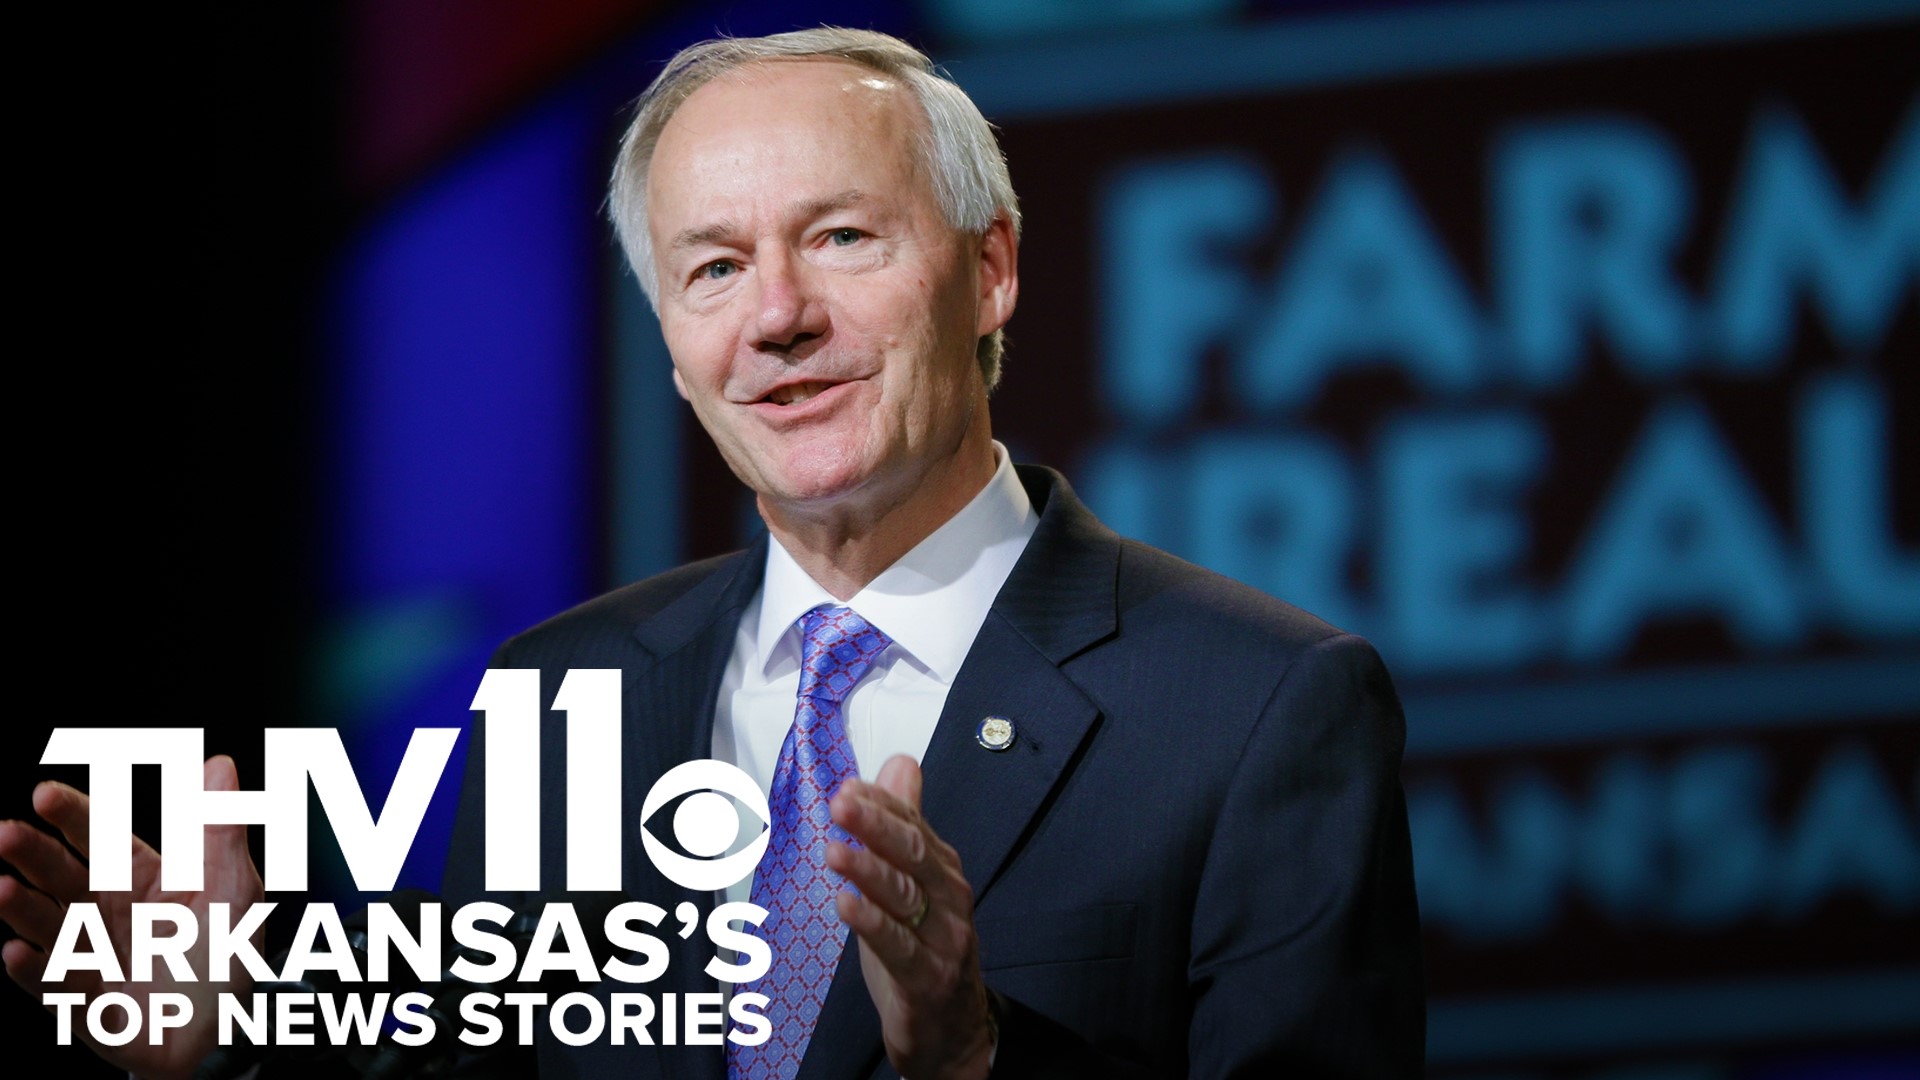 Rolly Hoyt reports on the top news stories in Arkansas, including the possibility of severe weather and the governor's comments on a presidential run in 2024.